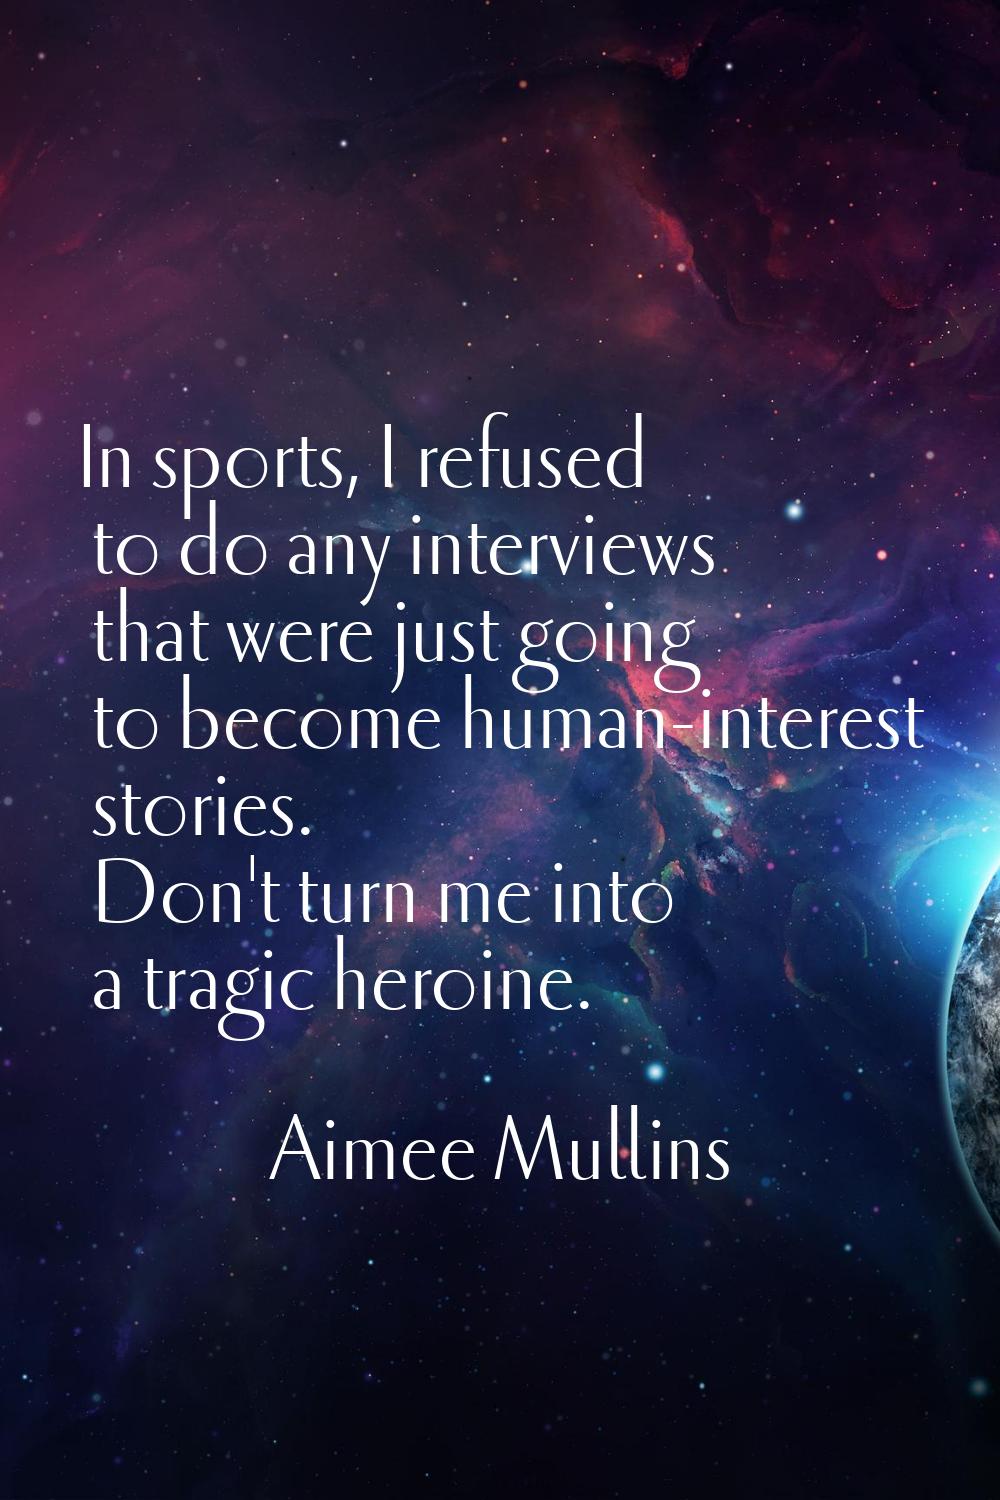 In sports, I refused to do any interviews that were just going to become human-interest stories. Do